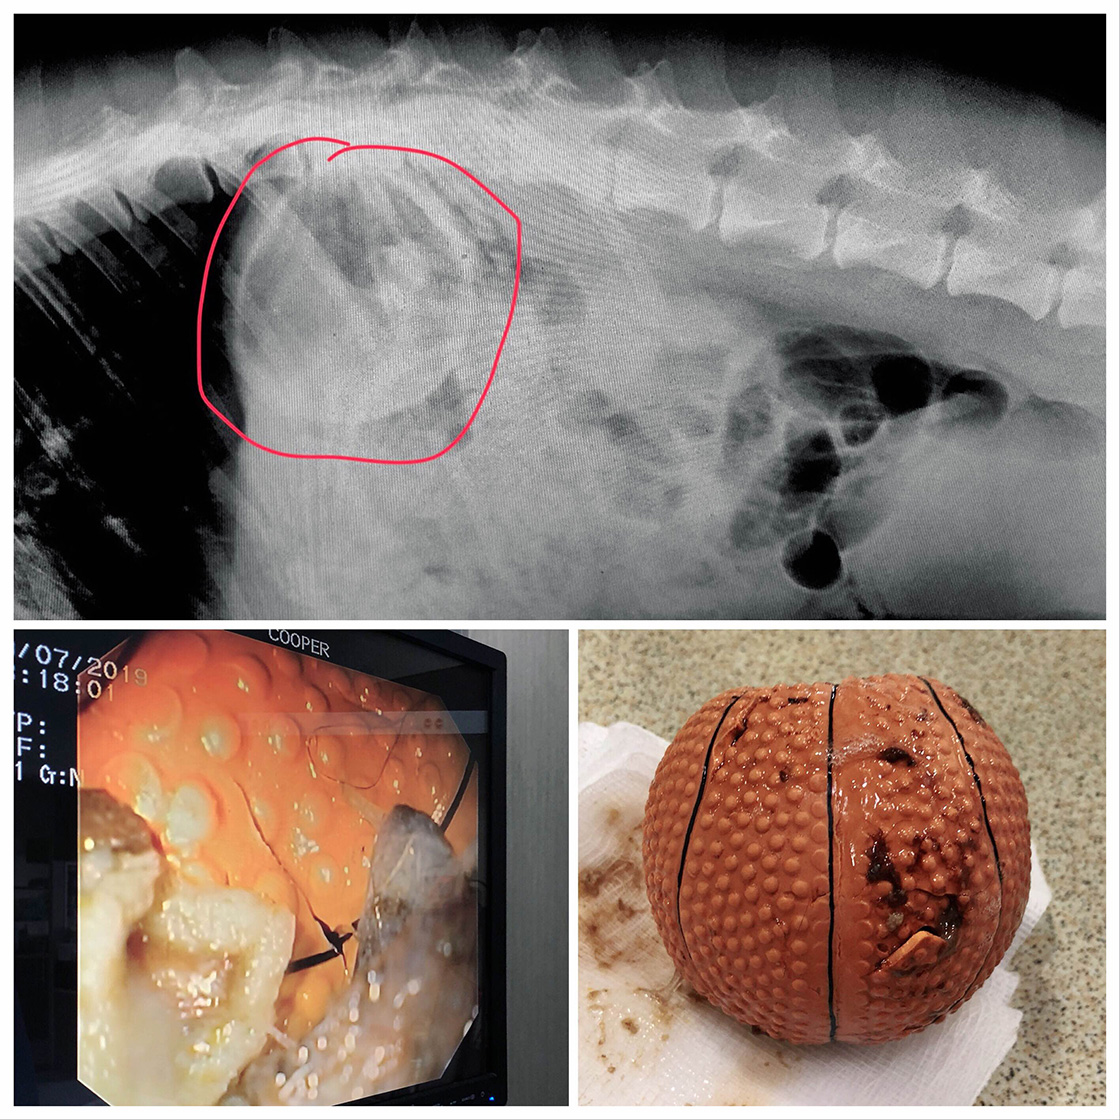 A composite image showing an X-ray of a dog's gastrointestinal obstruction, an endoscopic view, and the surgically removed foreign object resembling a ball.